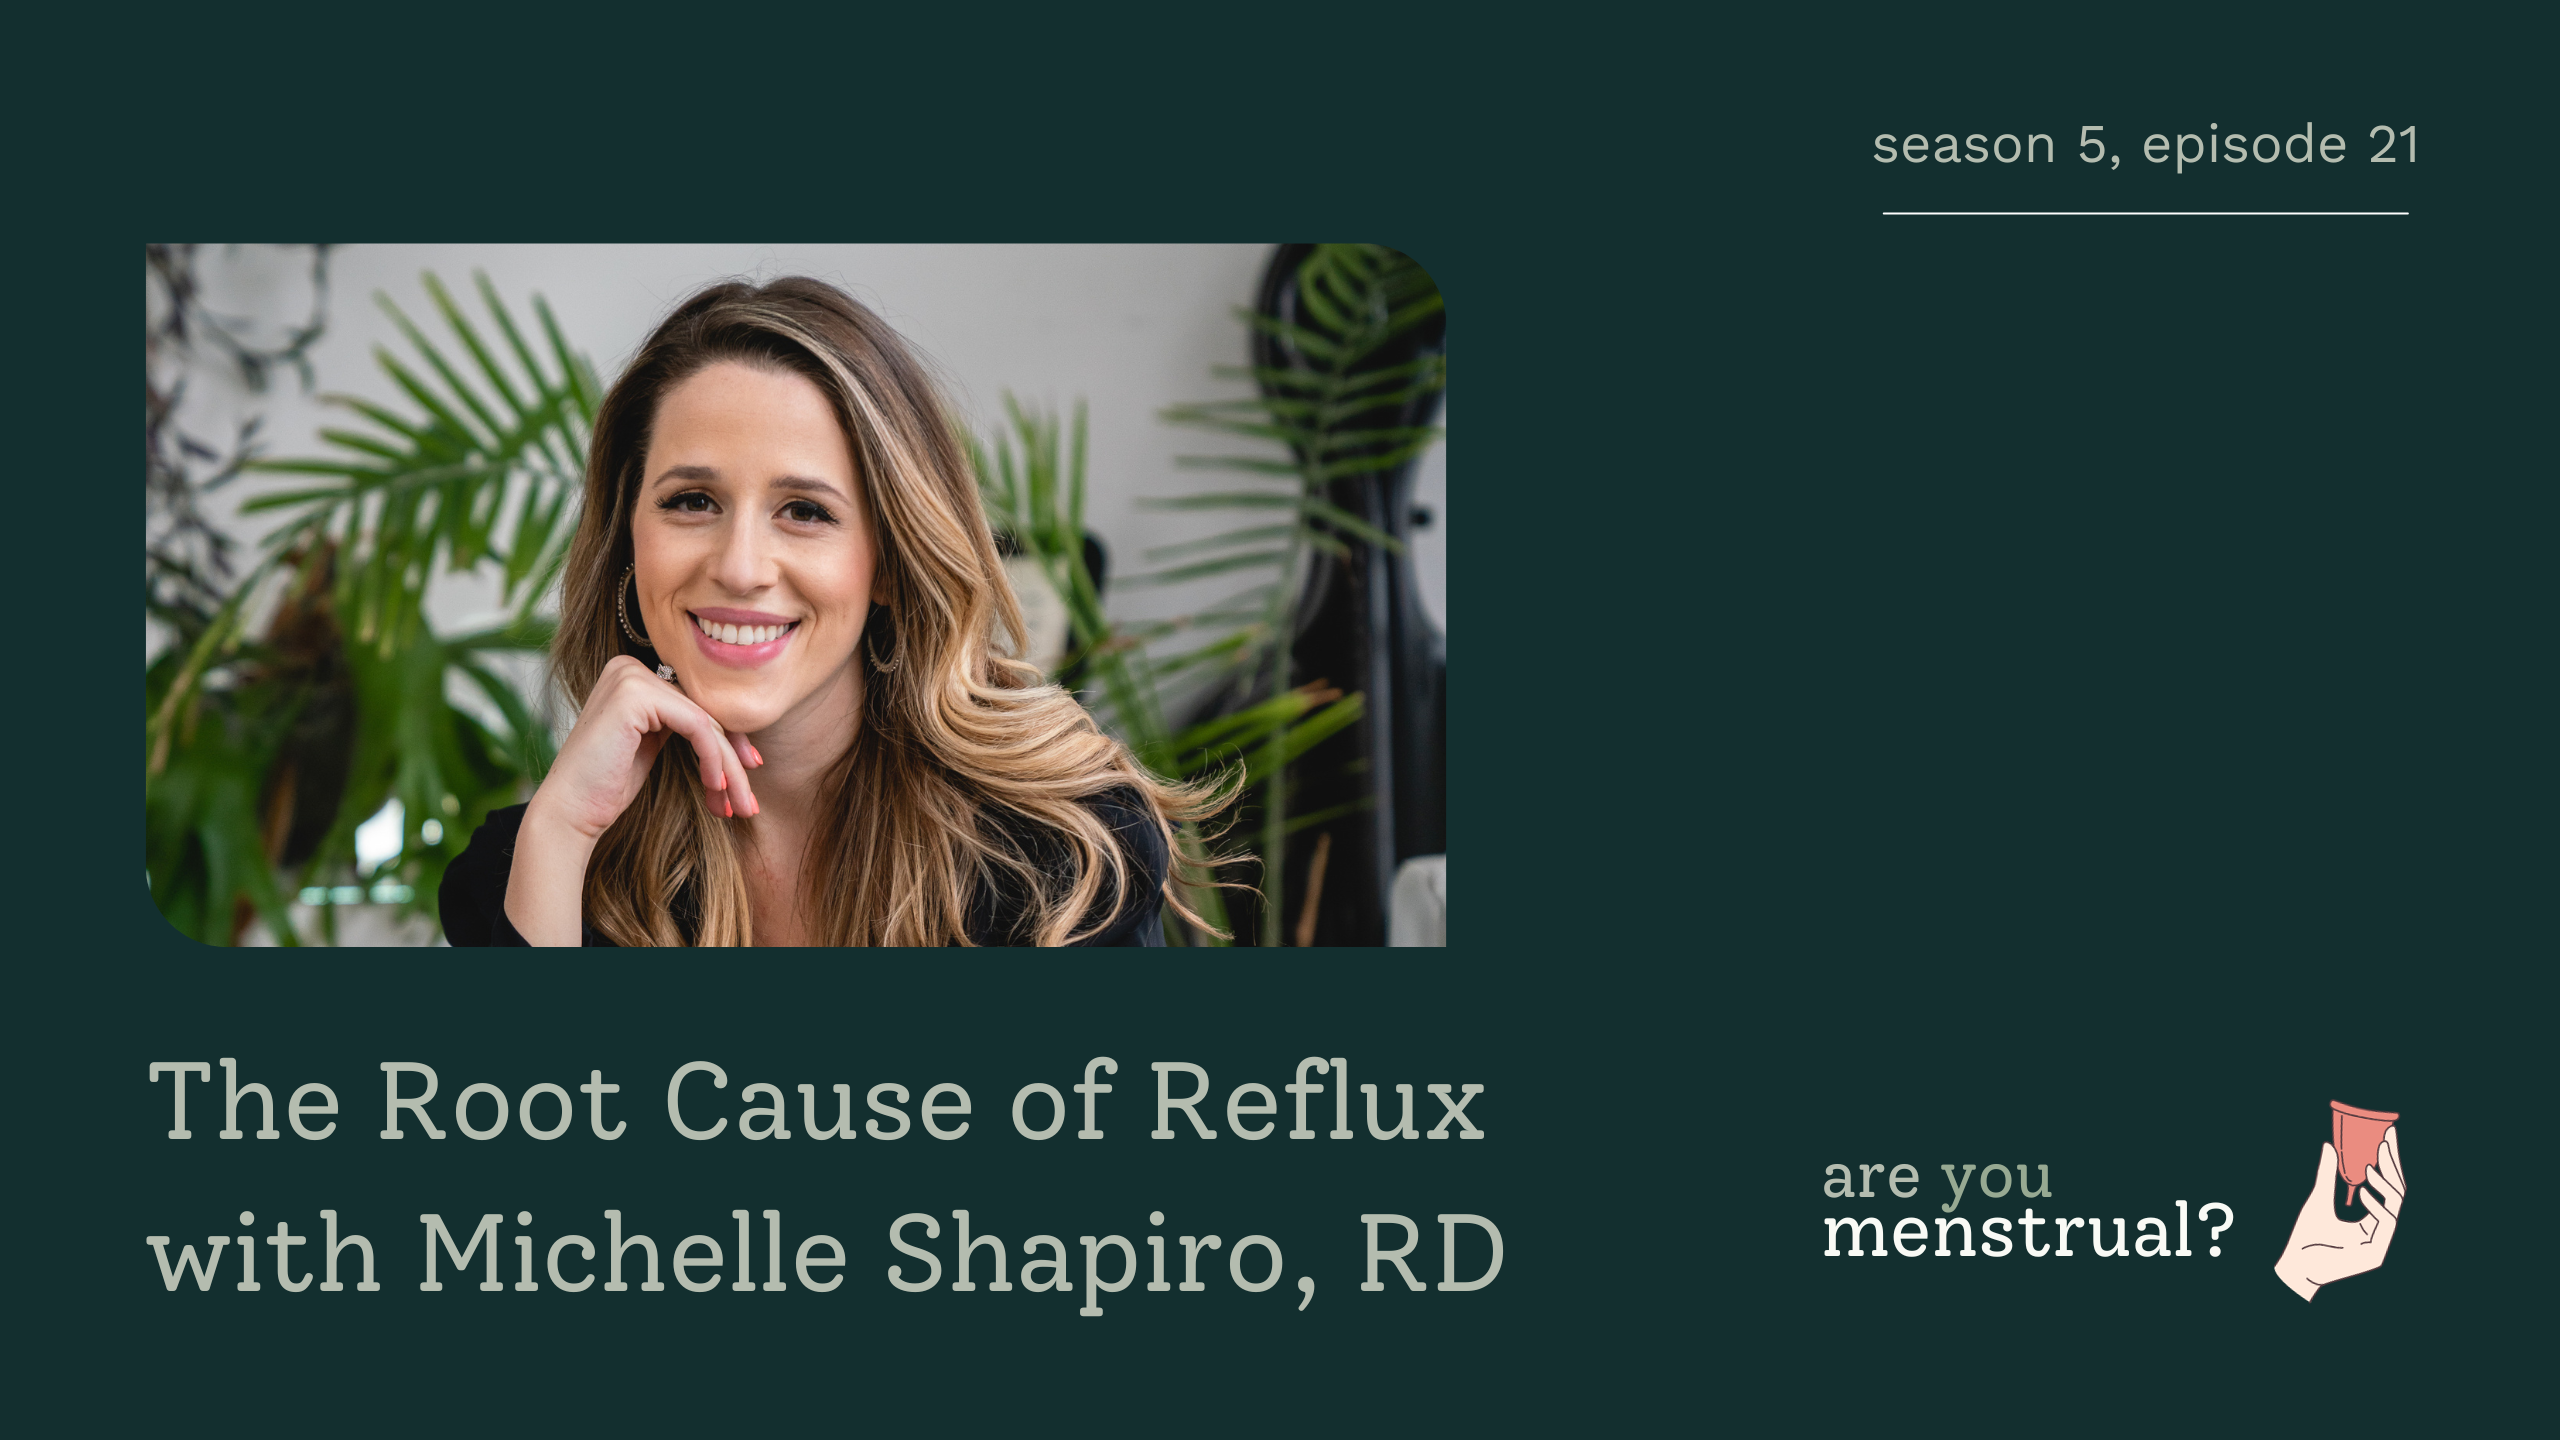 The Root Cause of Reflux with Michelle Shapiro, RD